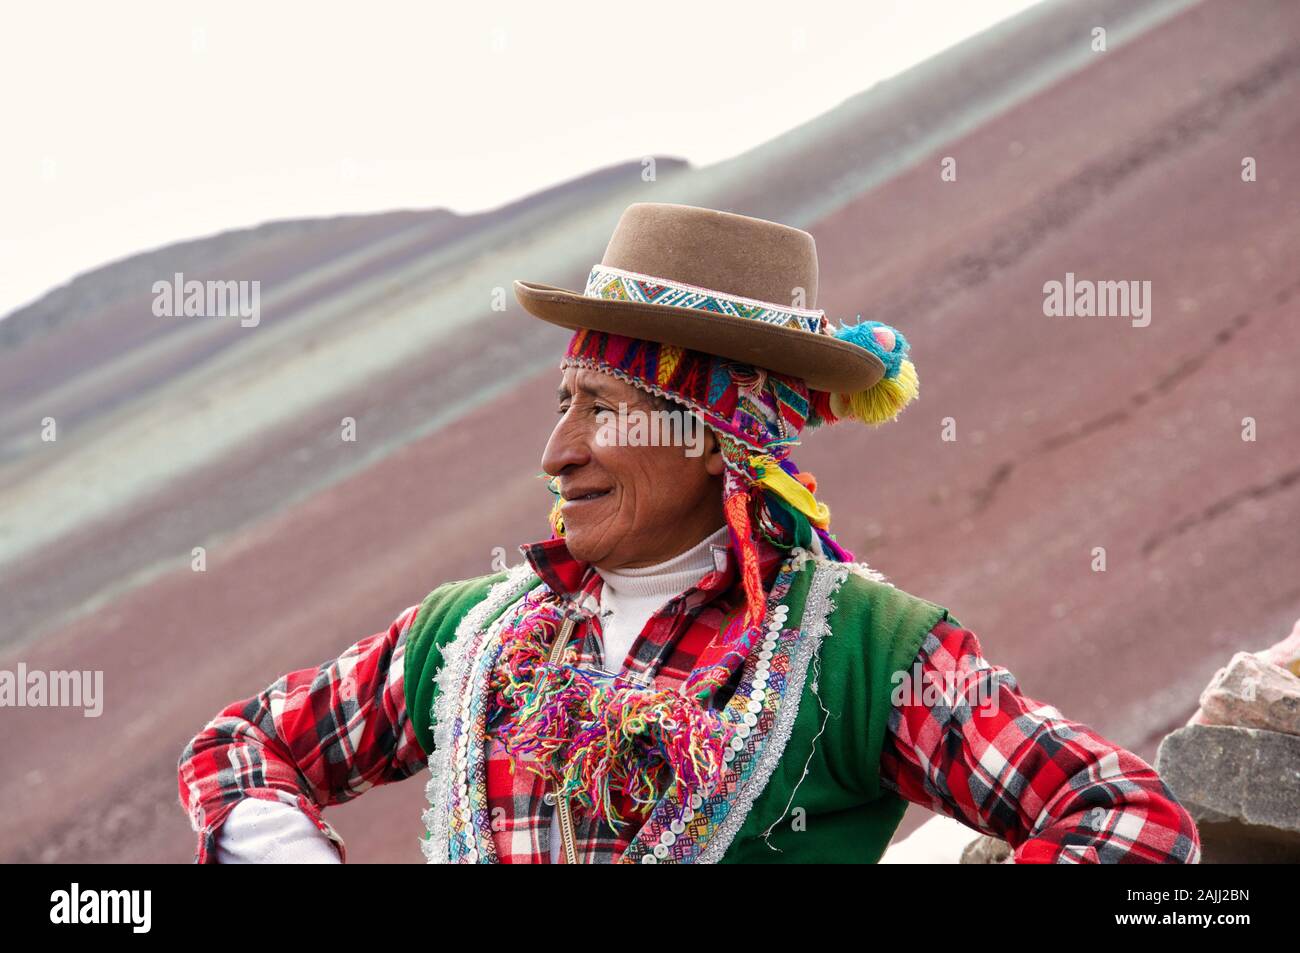 Peruvian man in traditional clothes Stock Photo